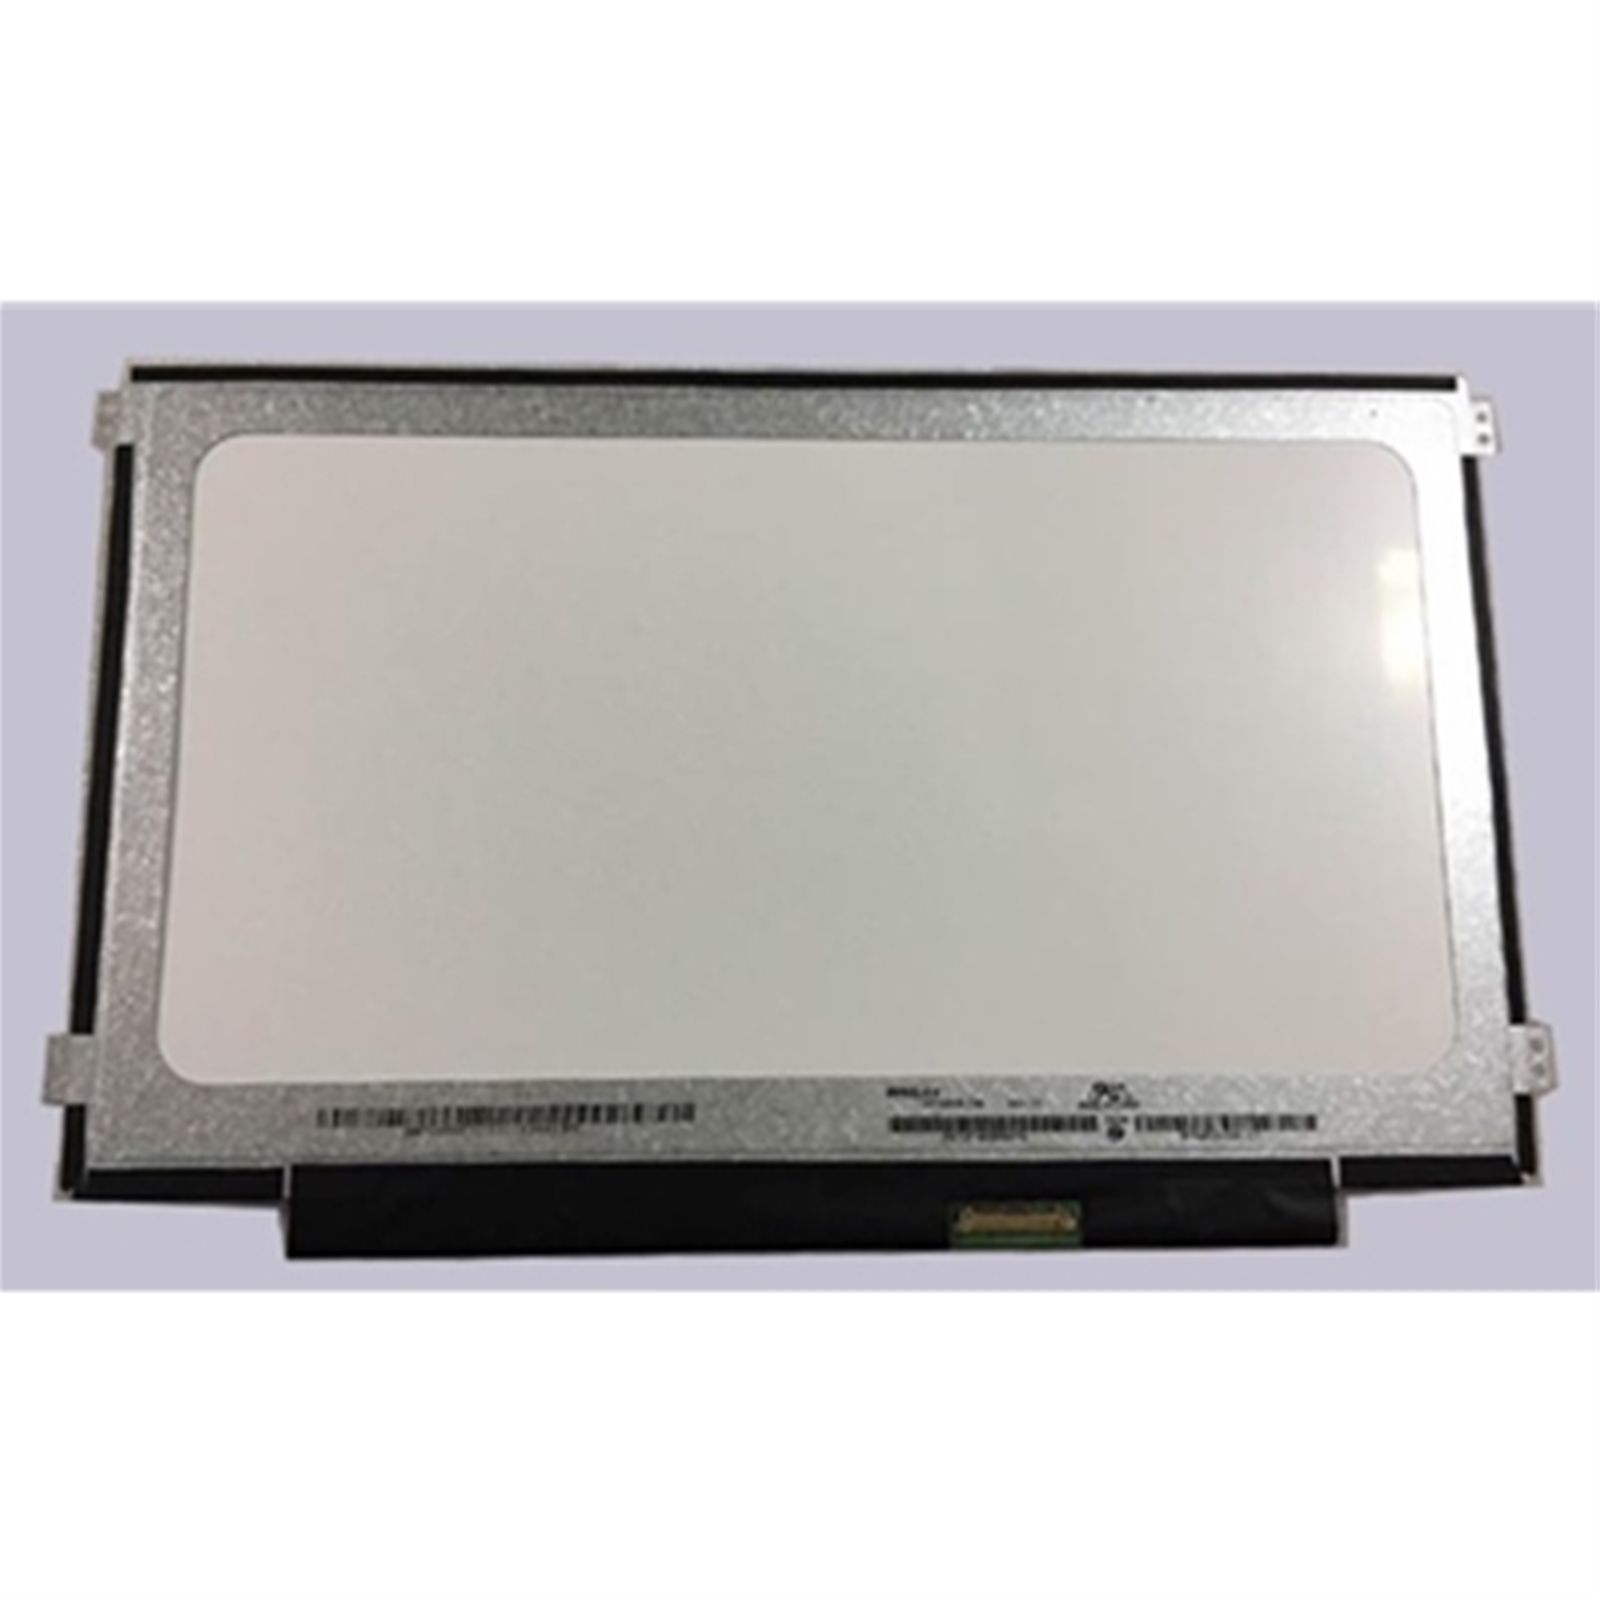 BOE N116BCA-EA1 11.6 Inch HD 1366x768 Replacement Laptop Screen,30 pin Socket, Includes Left and Right Brackets, Glossy